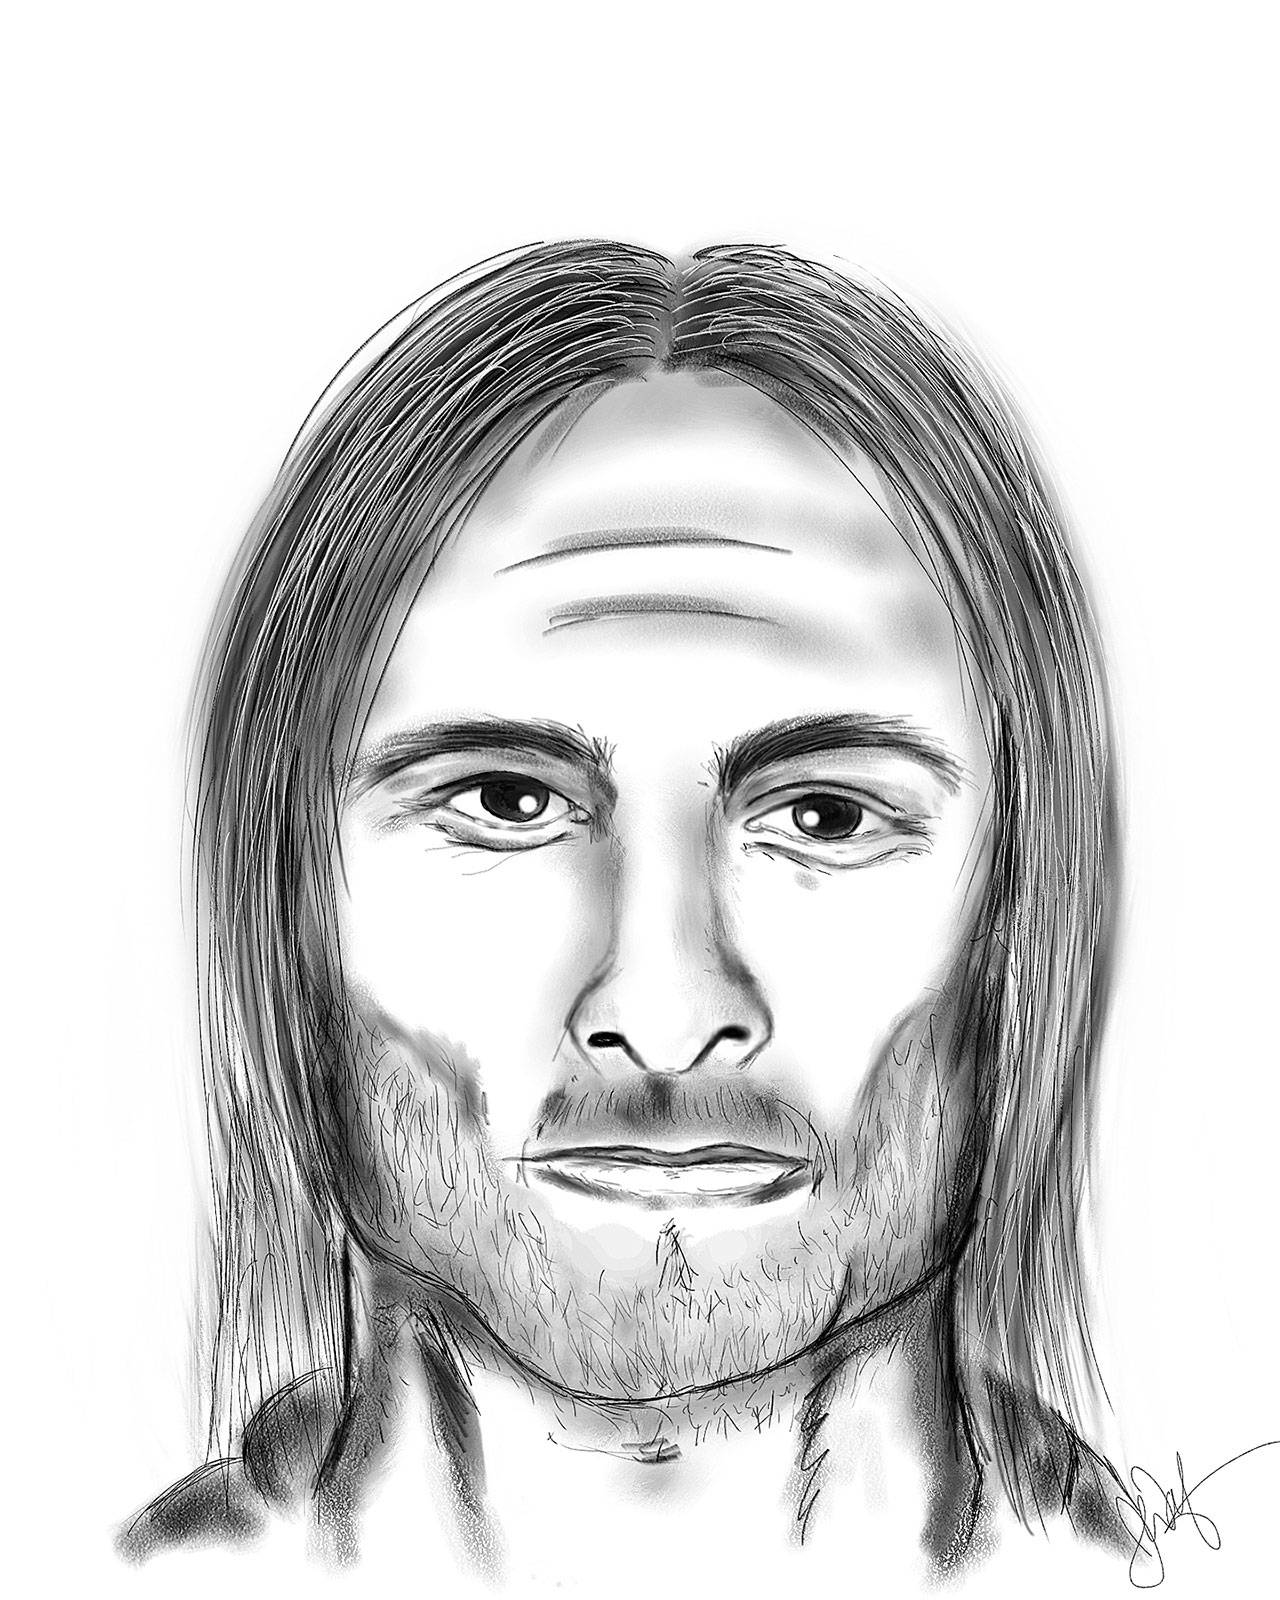 Sheriff’s Office seeks help to find suspect in attempted kidnapping/sexual assault case